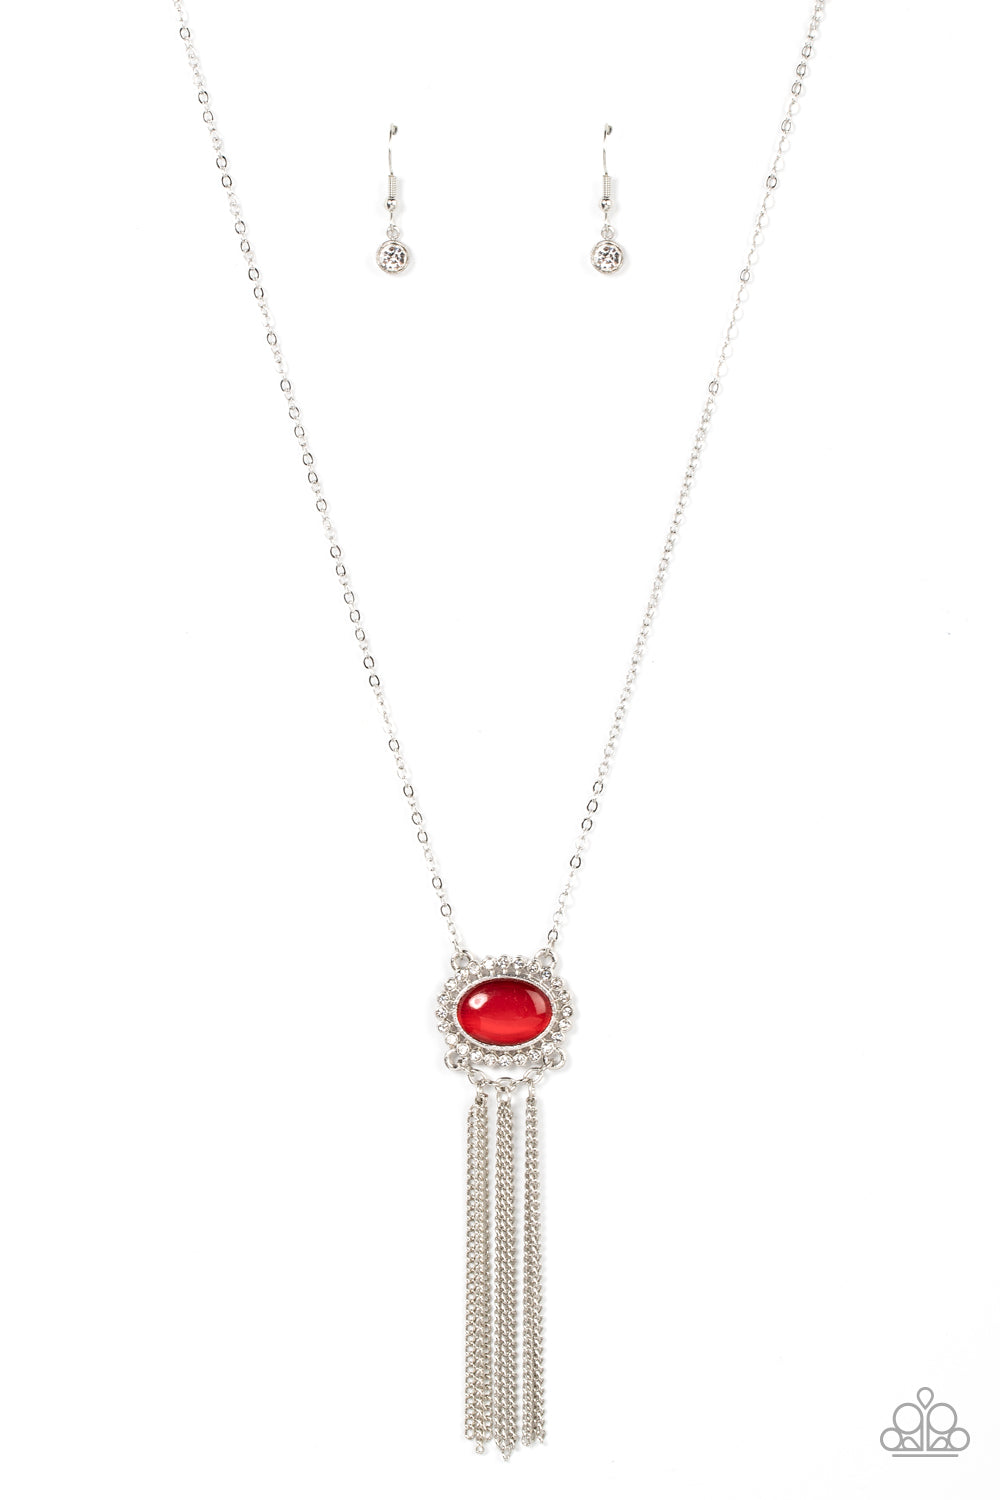 Paparazzi Happily Ever Ethereal Red Long Necklace - P2RE-RDXX-233XX